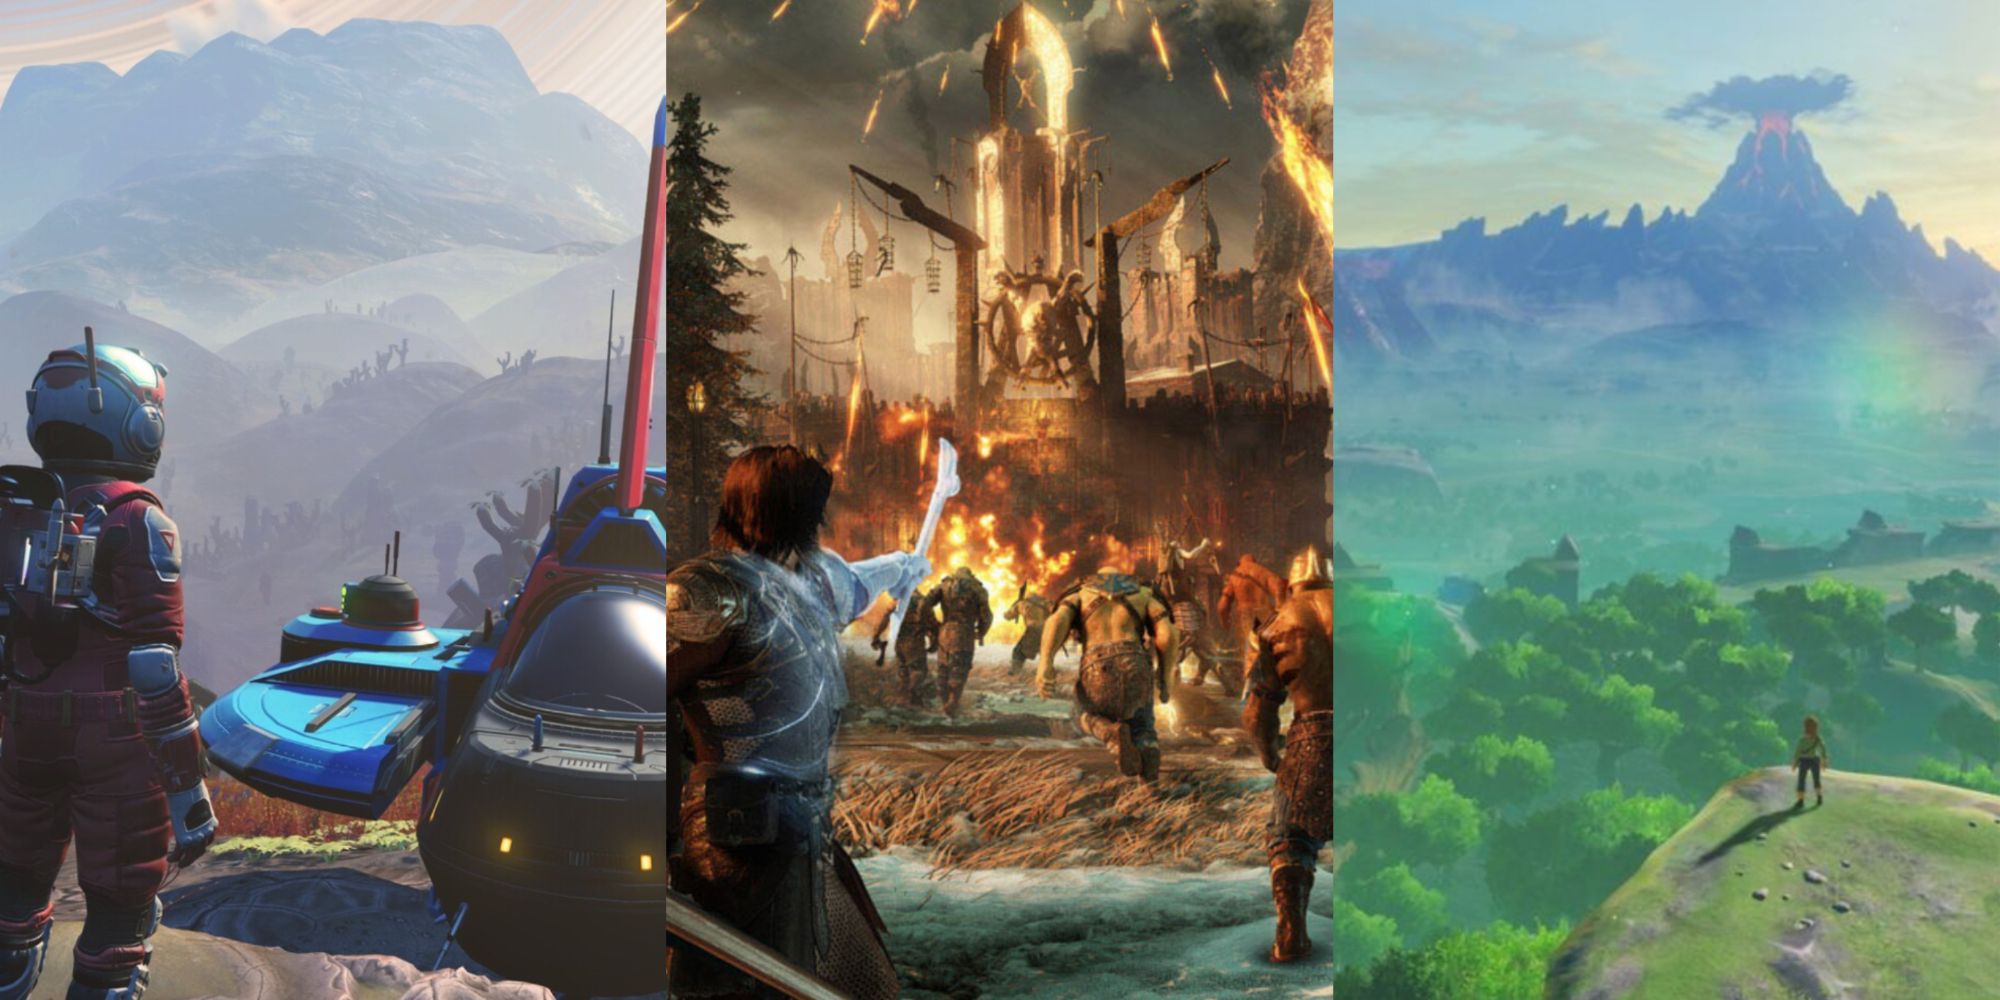 Collage of Action-Adventure Games Better Played On A Small Screen, featuring No Man's Sky, Middle-earth: Shadow of War, and The Legend of Zelda: Breath of the Wild